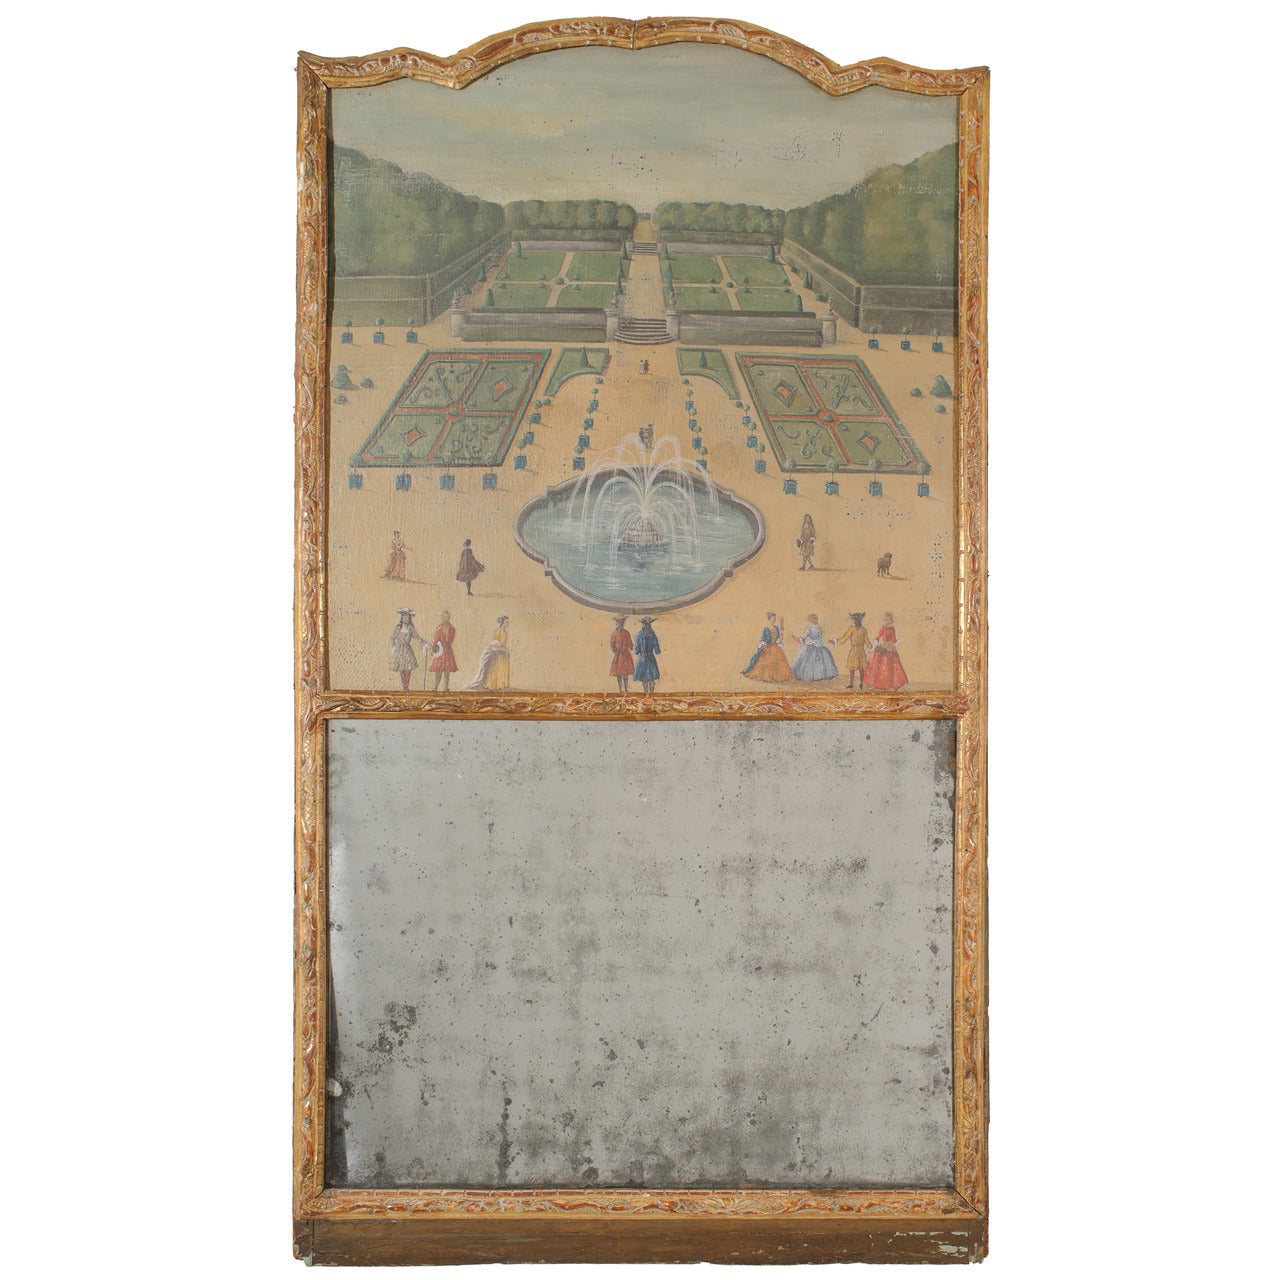 Regence Trumeau Mirror with Original Landscape Painting on Canvas, 1715-1730 For Sale